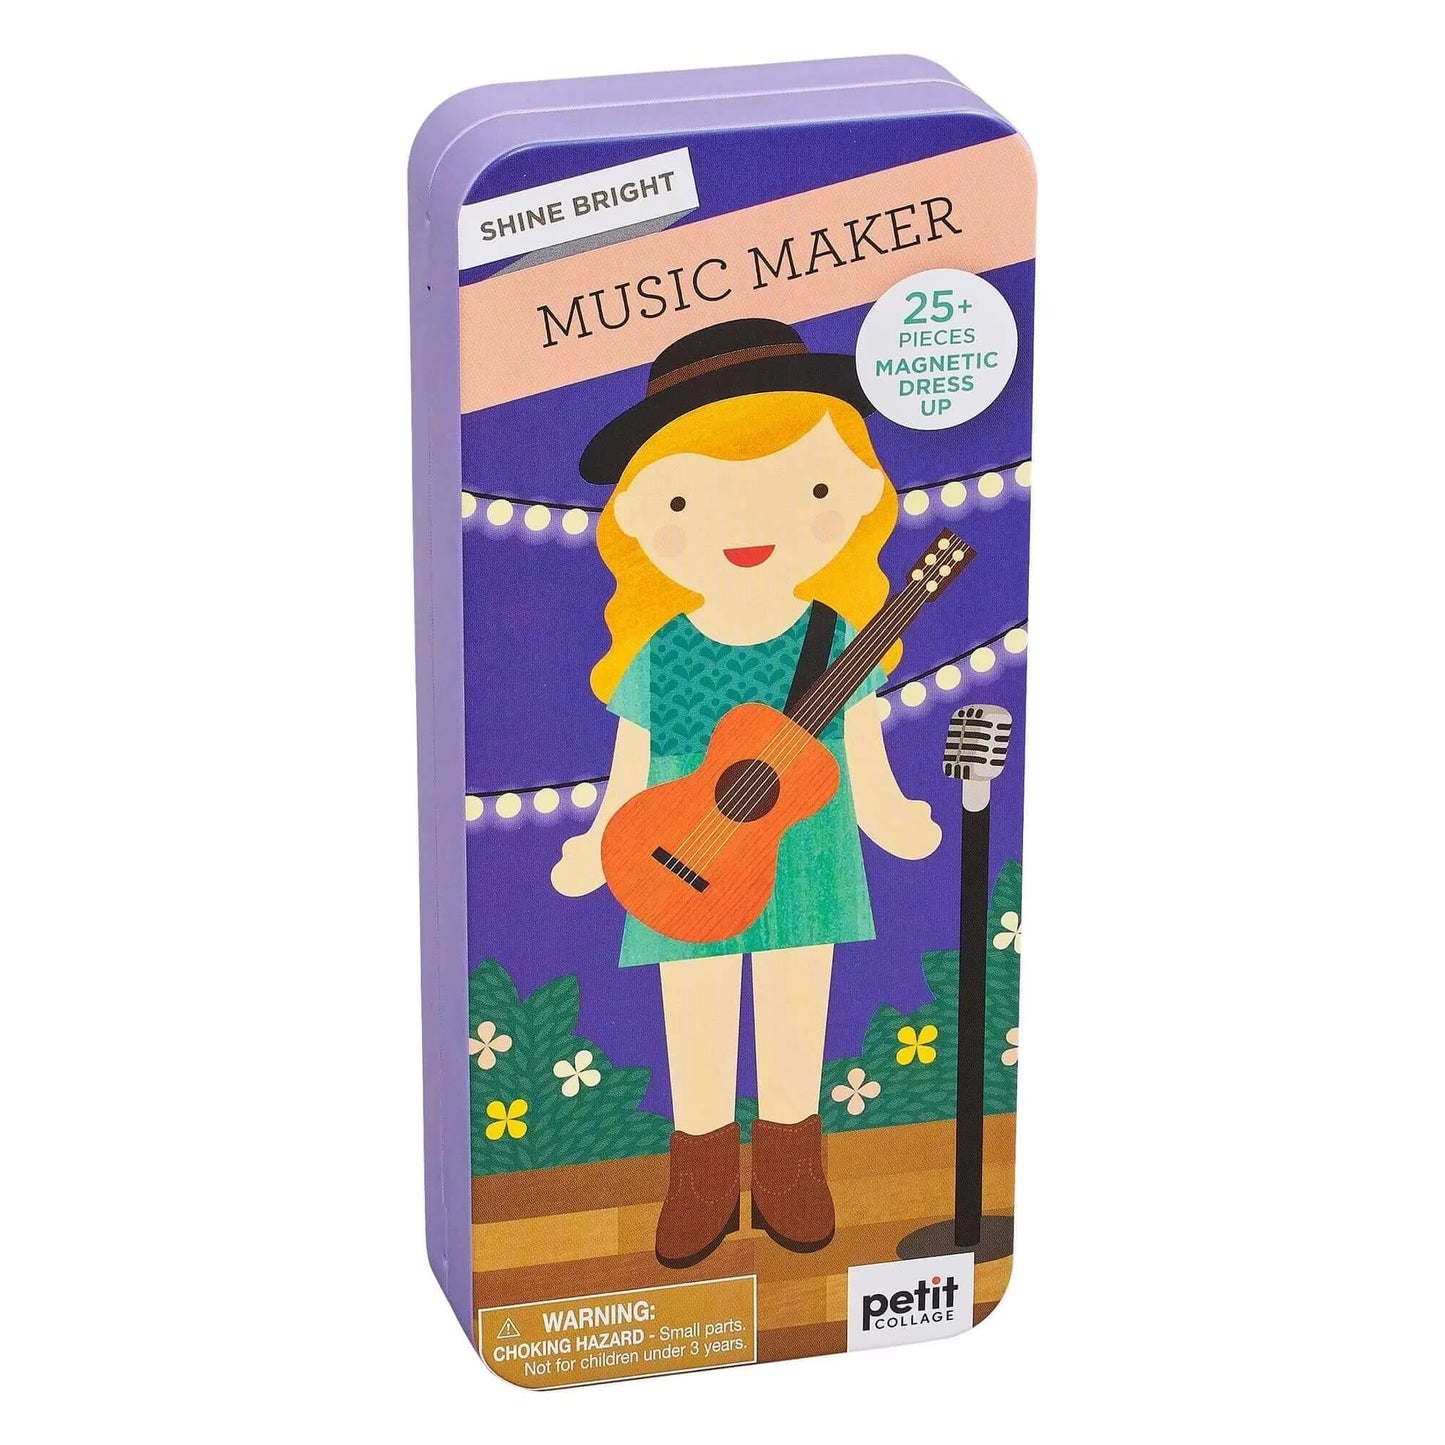 Shine Bright Music Maker Magnetic Dress Up, Petit Collage, eco-friendly Toys, Mountain Kids Toys